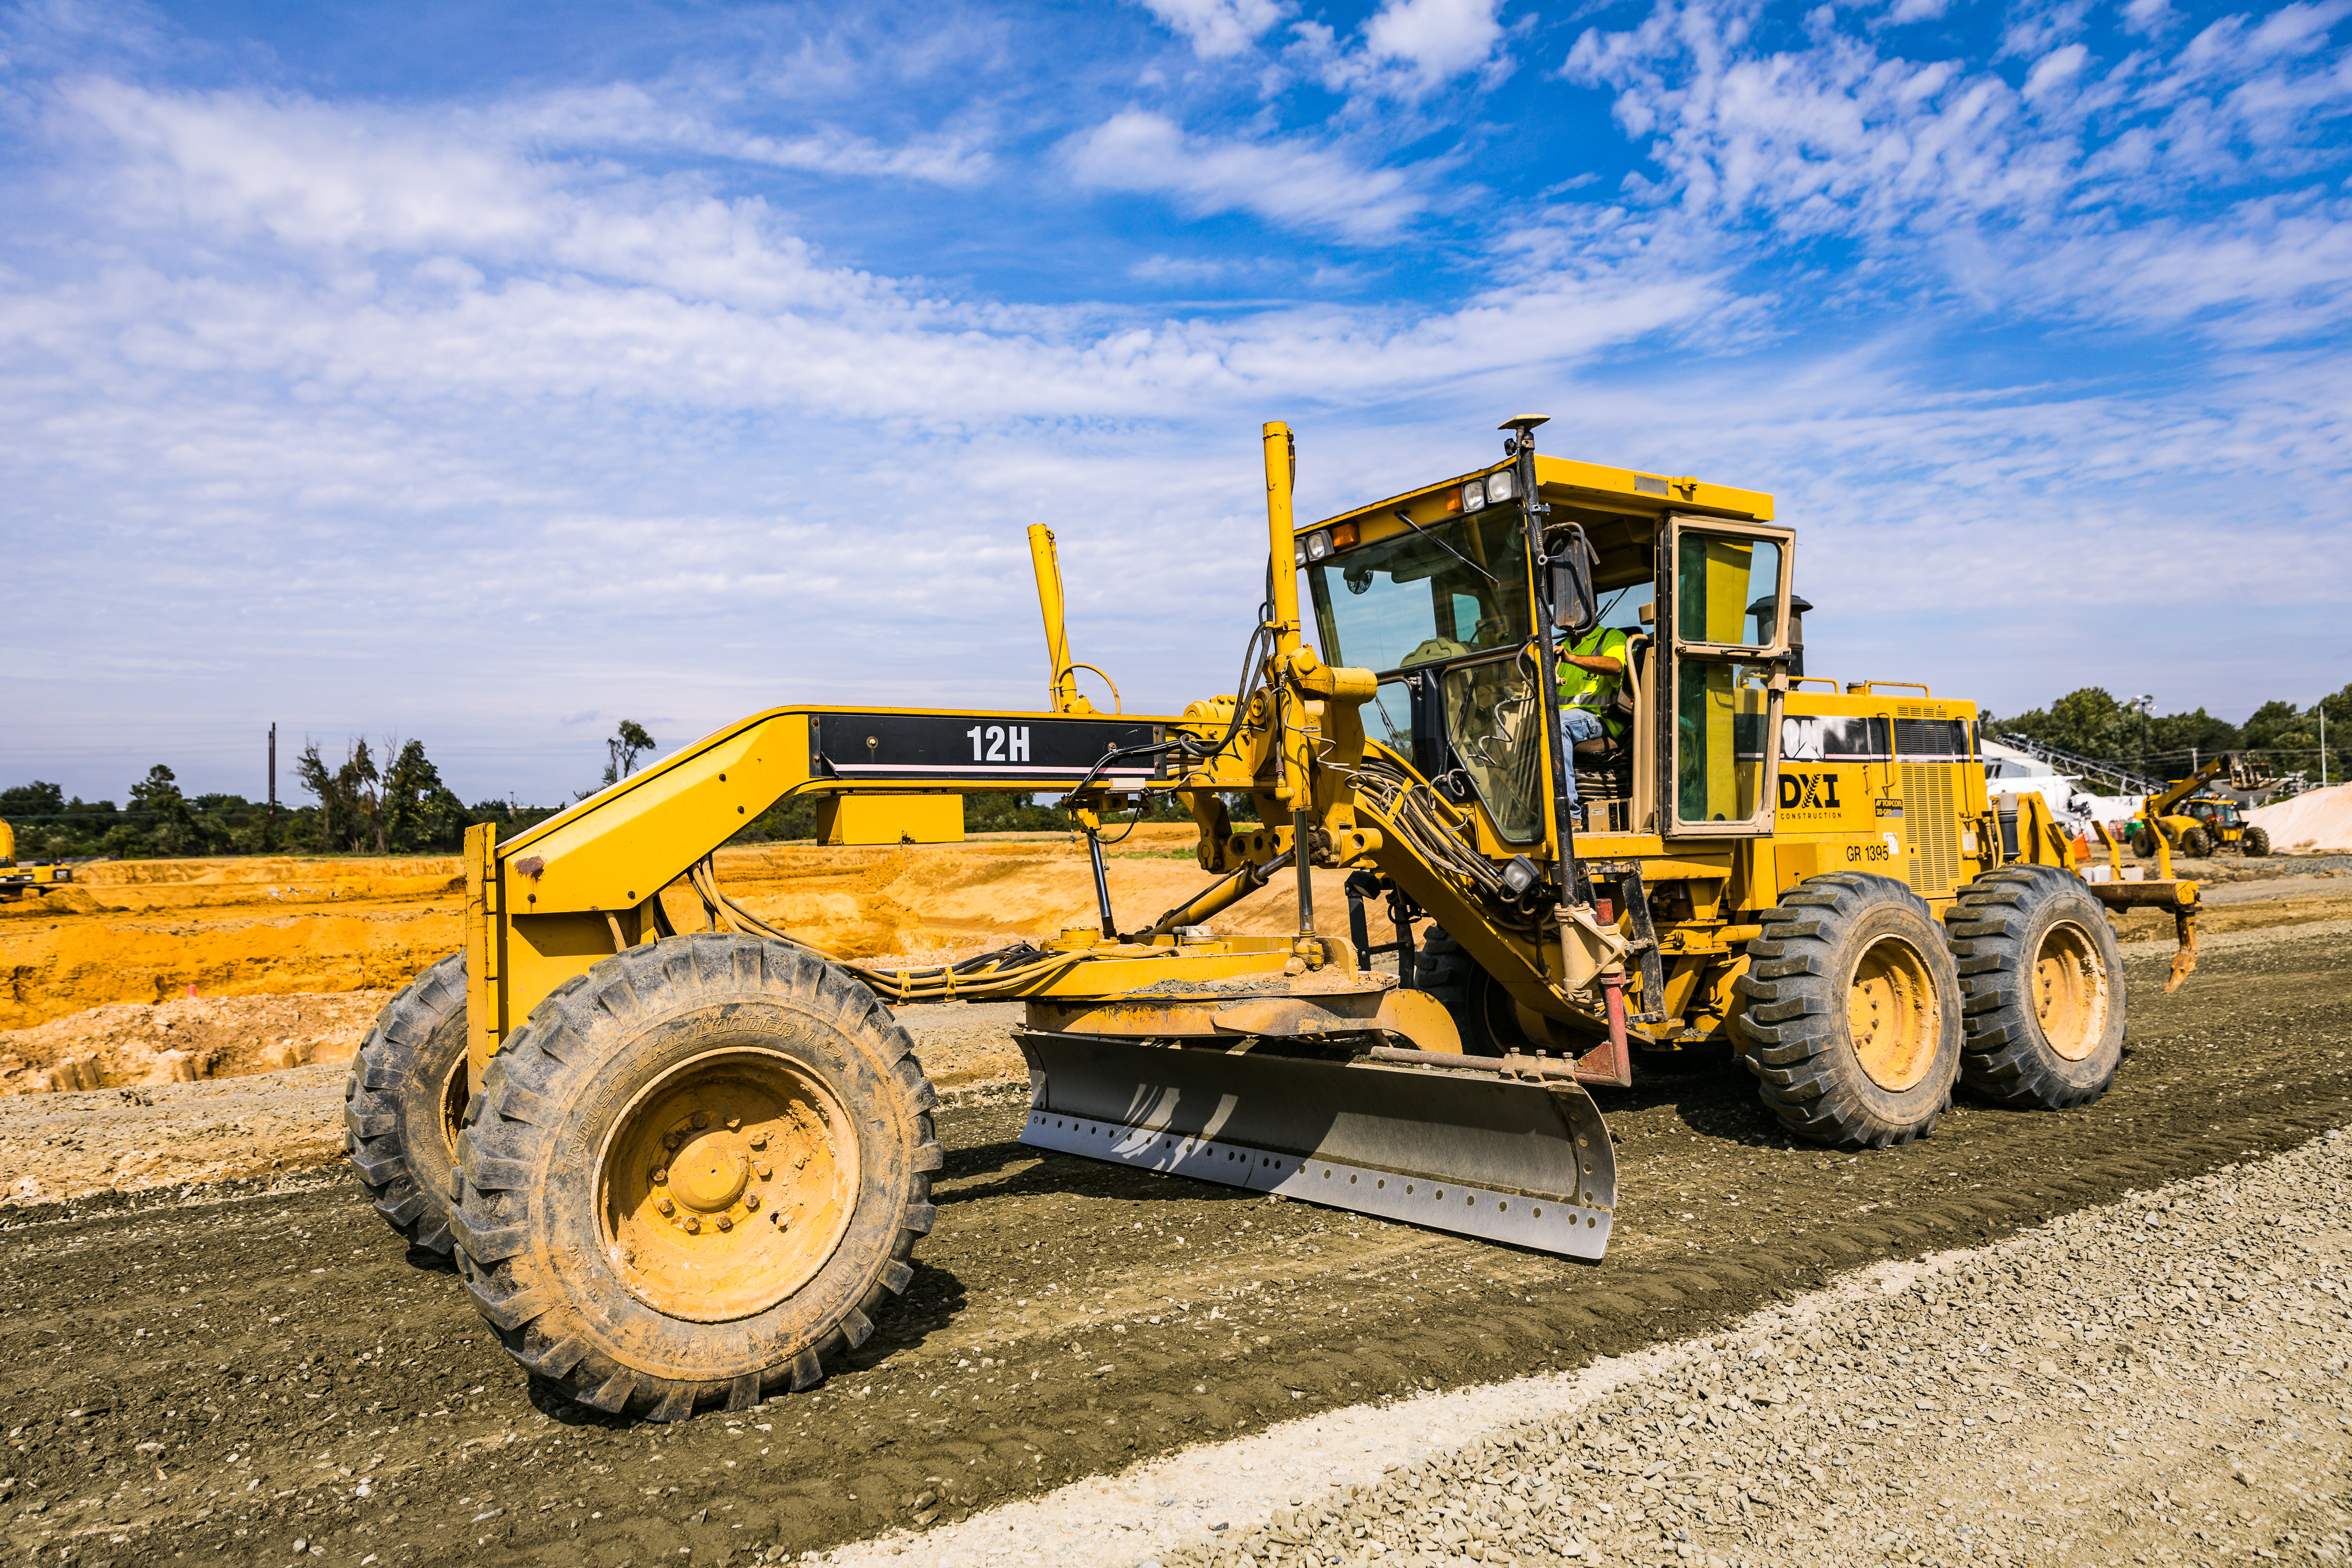 As Paving Contractors, DXI Construction Provides Road Work and Paving Services and Road Work Construction in MD, PA, DE, VA and WV.